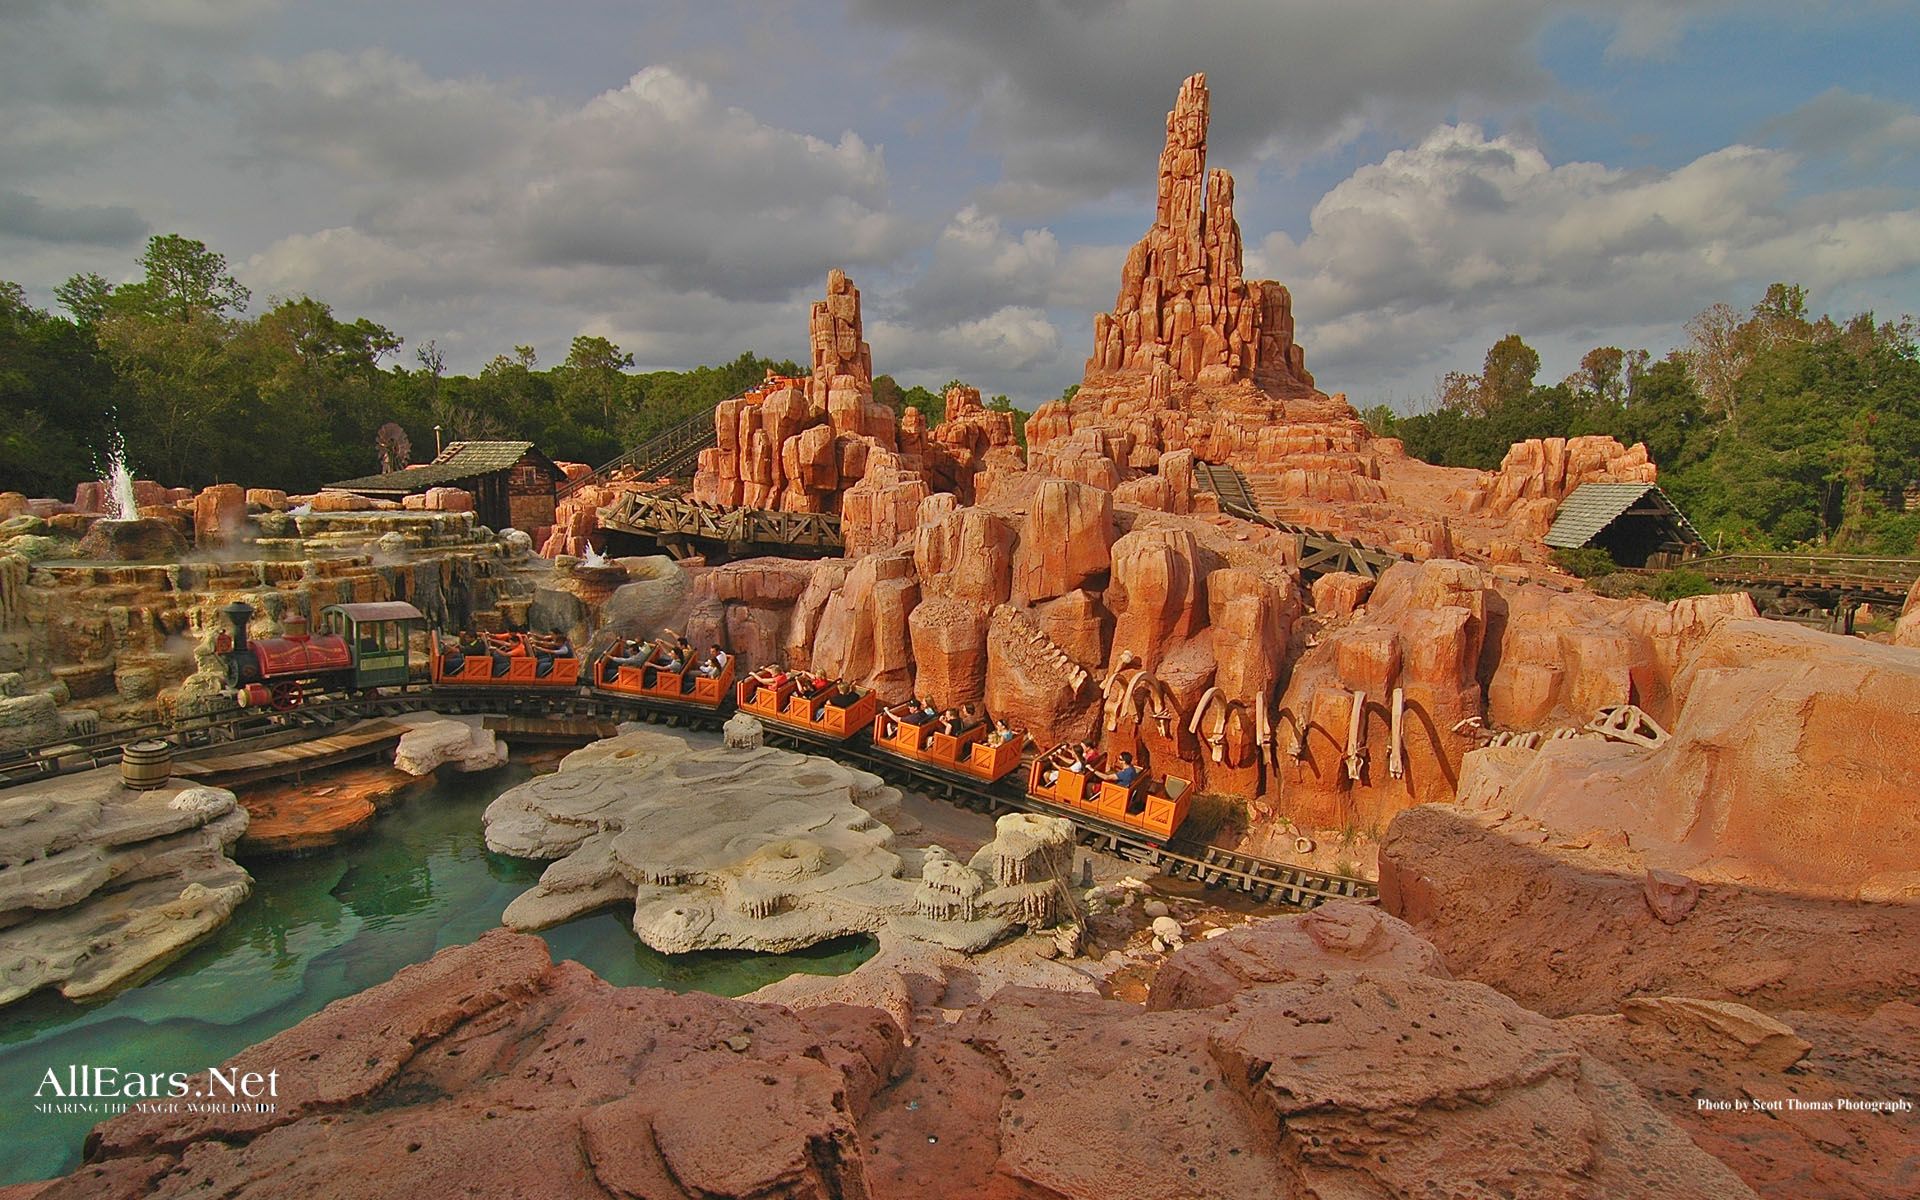 Things You Didn't Know About the Magic Kingdom Mountains